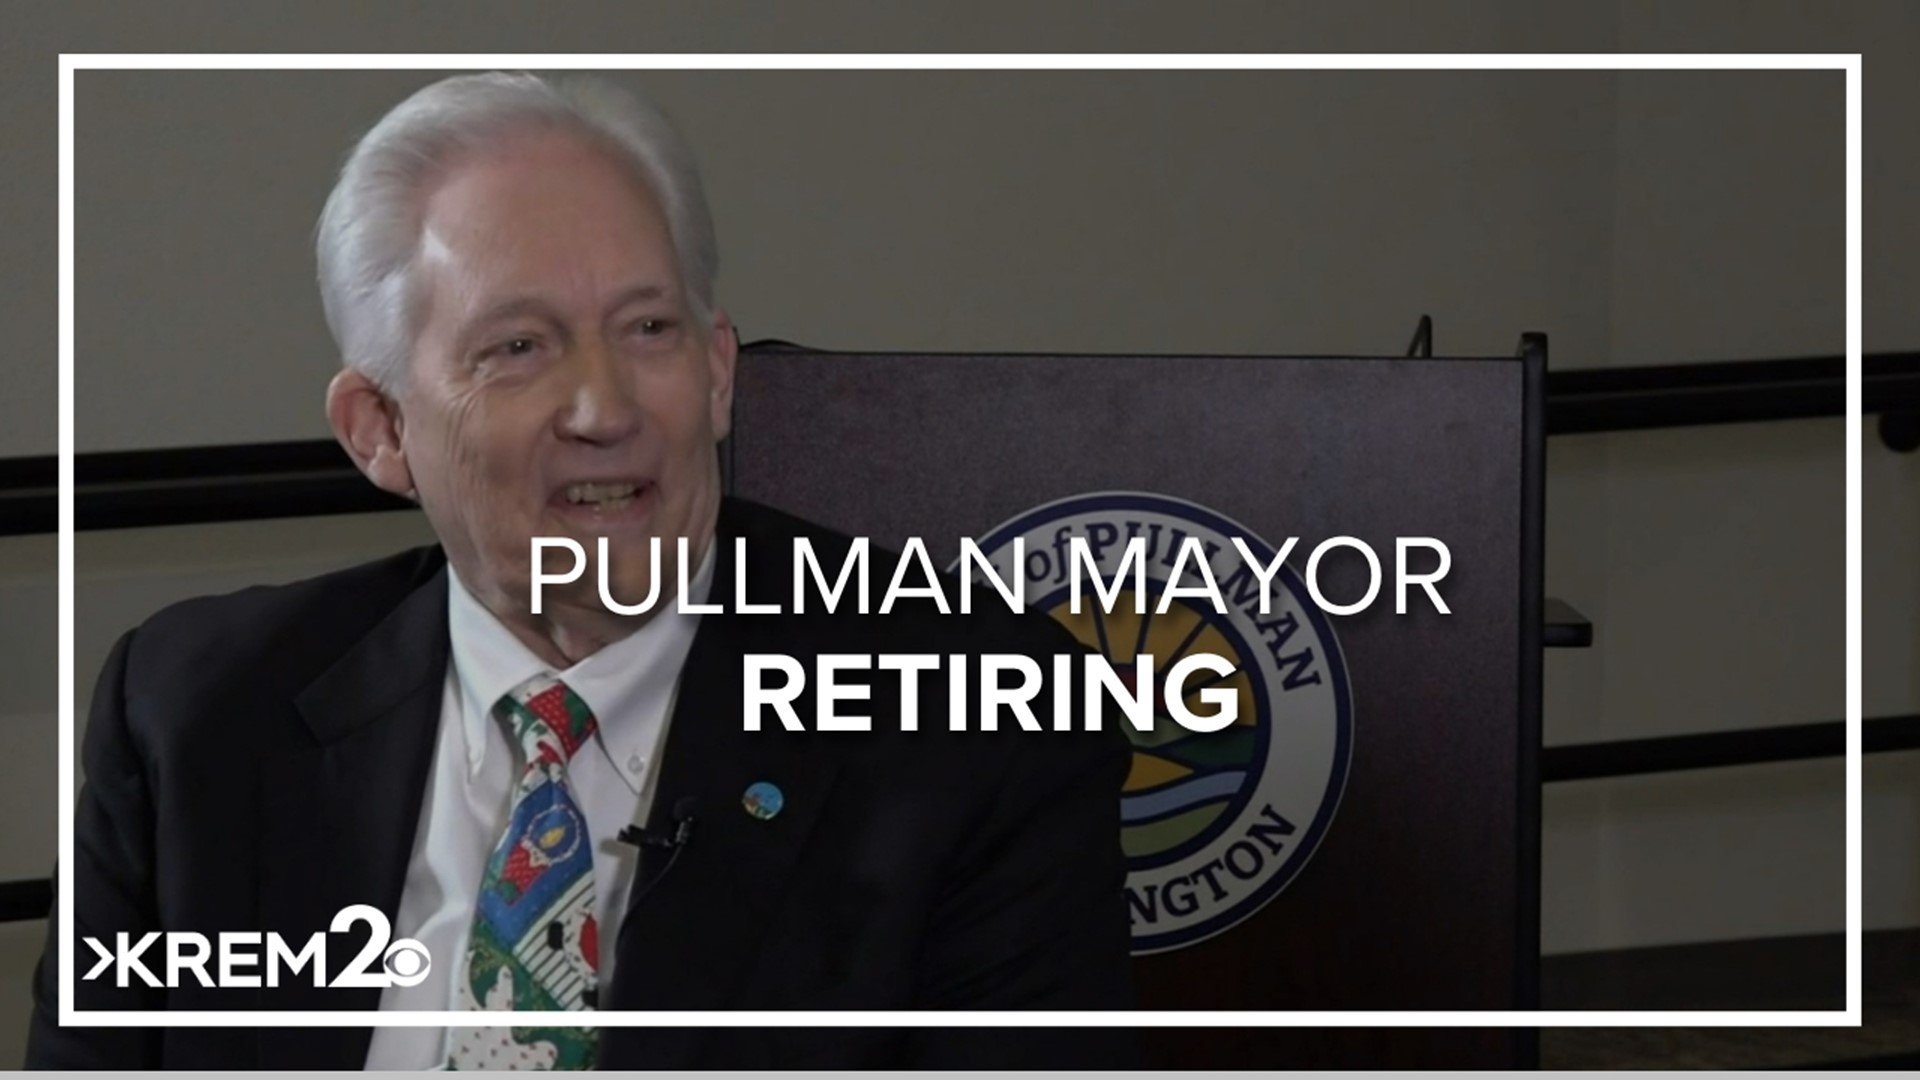 KREM 2 sits down with the Mayor of Pullman and voice of the Cougs to discuss his long and successful time as mayor.